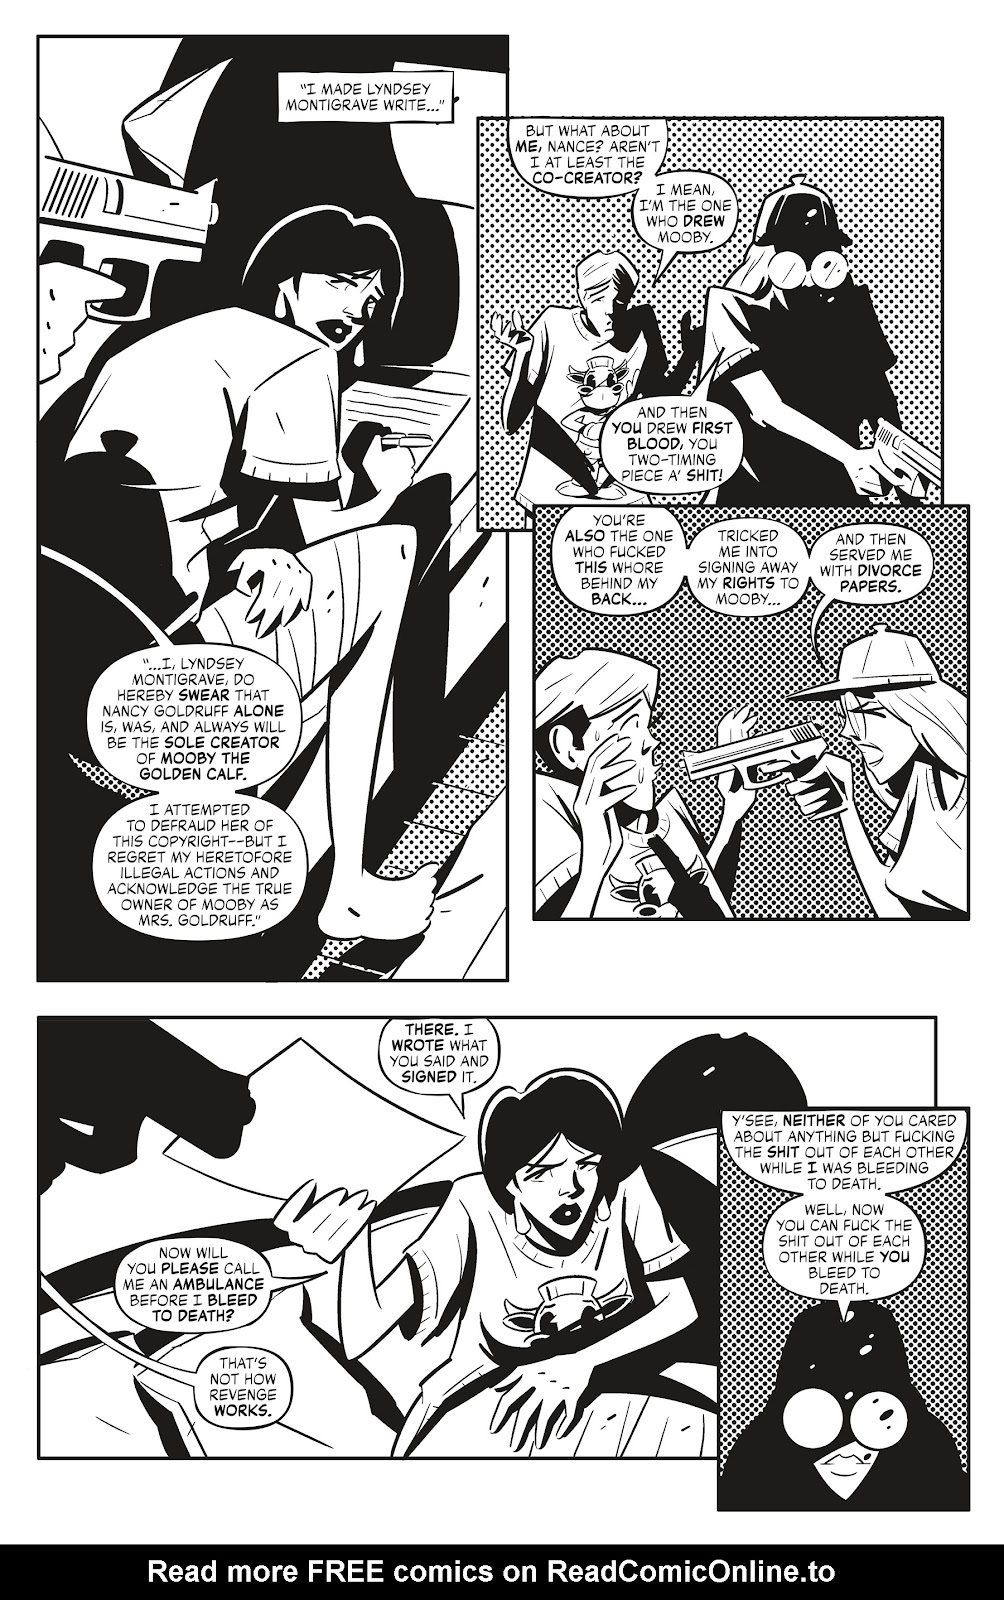 Quick Stops Vol. 2 issue 3 - Page 9